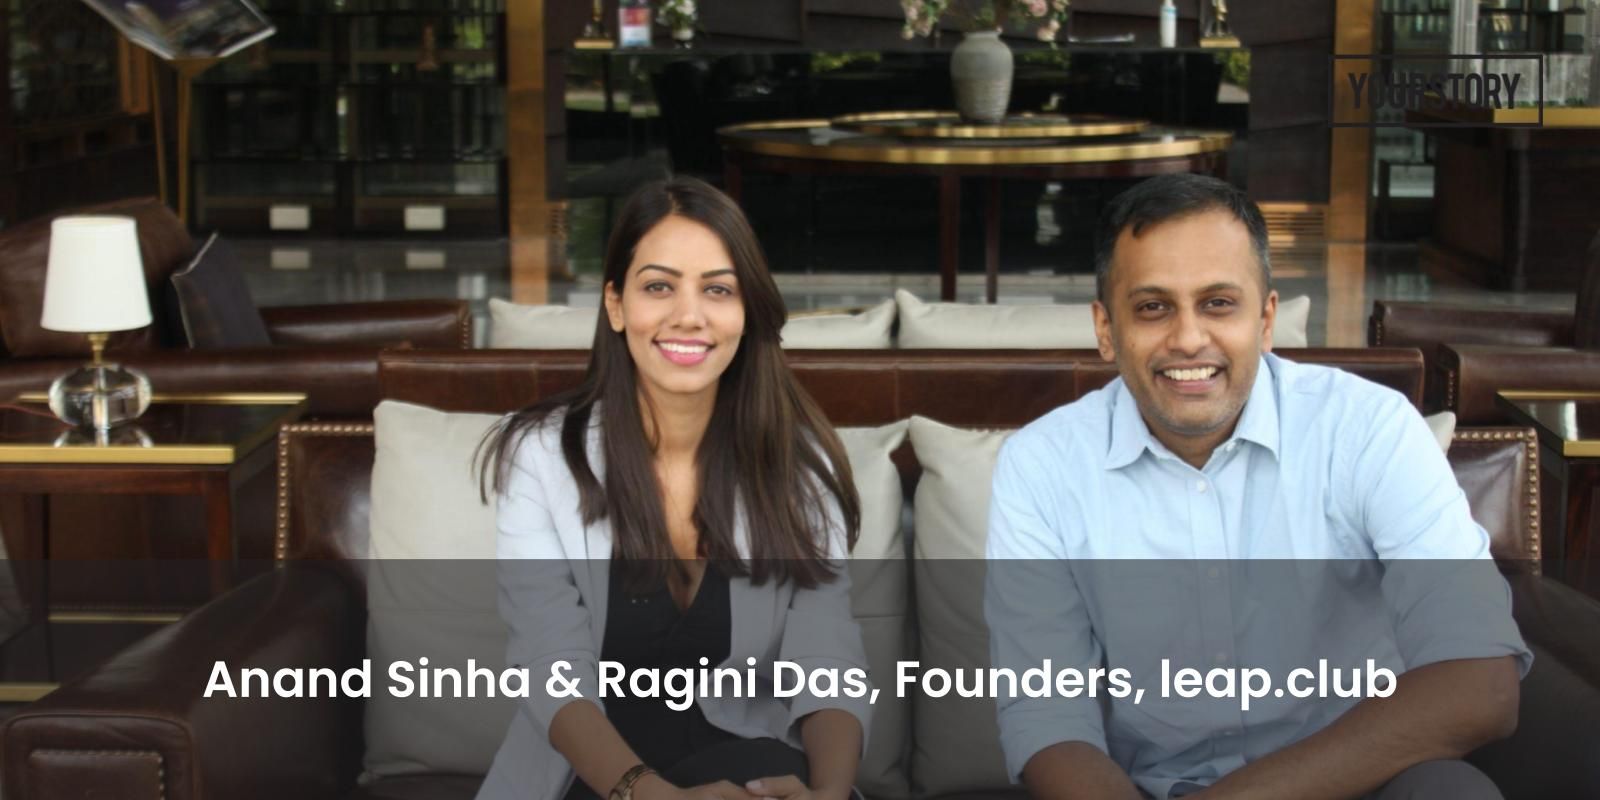 [Funding alert] leap.club raises $810K led by Enzia Ventures, Kunal Shah, and users